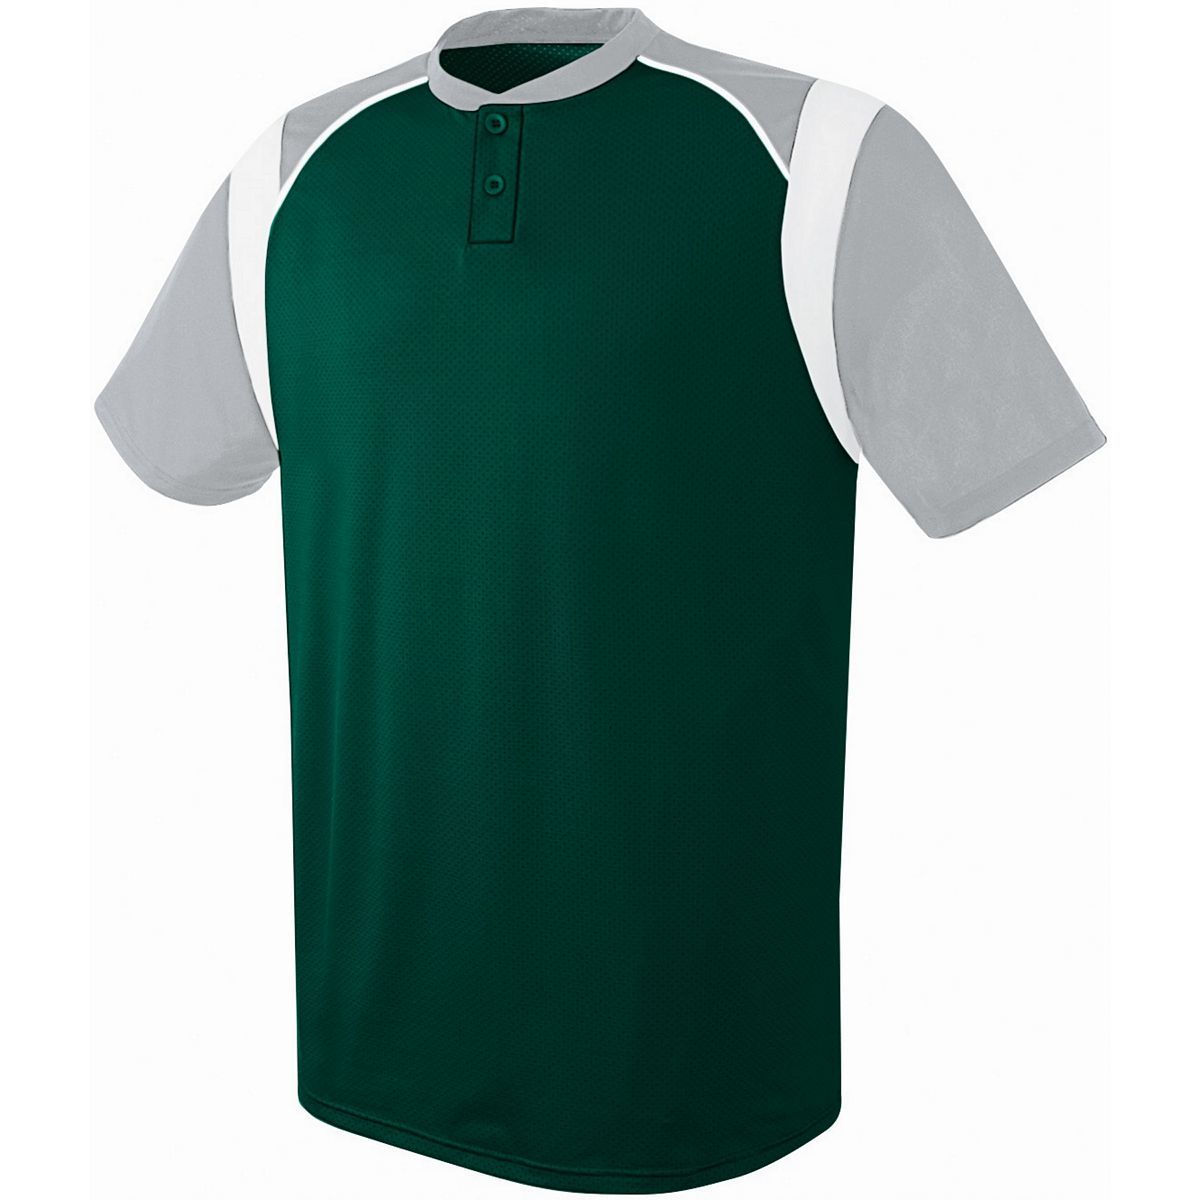 Augusta Sportswear Wildcard Two-Button Jersey in Forest/Silver Grey/White  -Part of the Adult, Adult-Jersey, Augusta-Products, Baseball, Shirts, All-Sports, All-Sports-1 product lines at KanaleyCreations.com